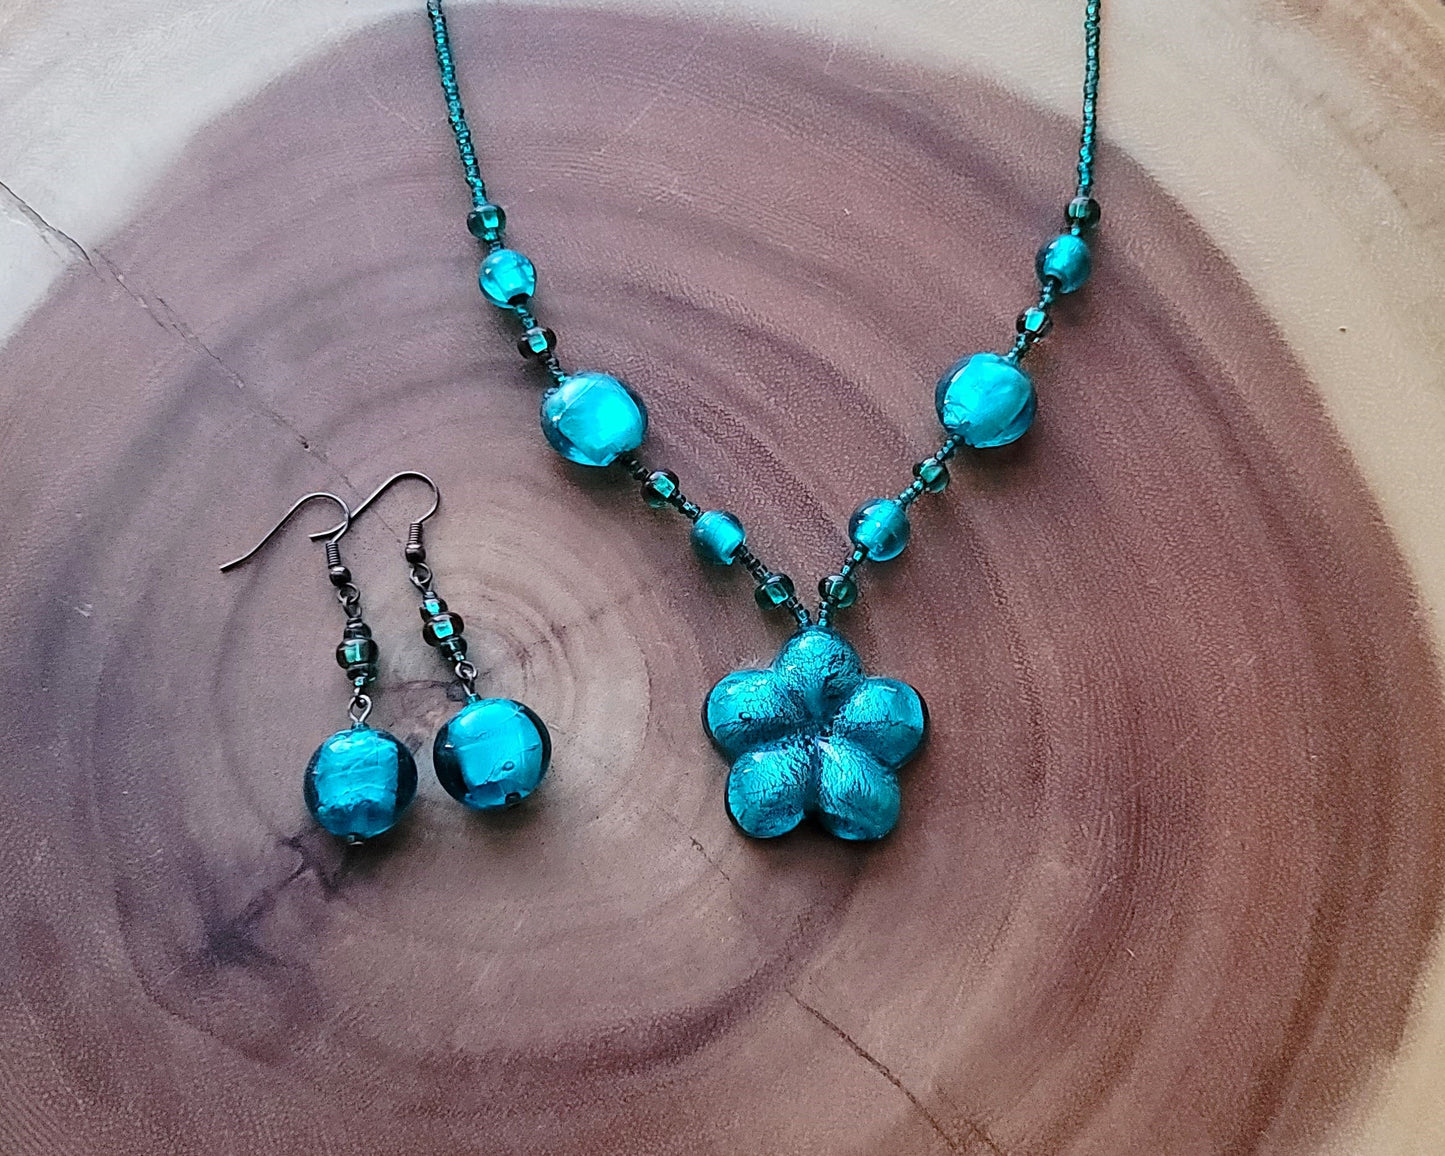 Luminous Teal Flower Necklace and Dangle Earring Set, a beaded teal, blue foil glass flower Necklace and Earrings